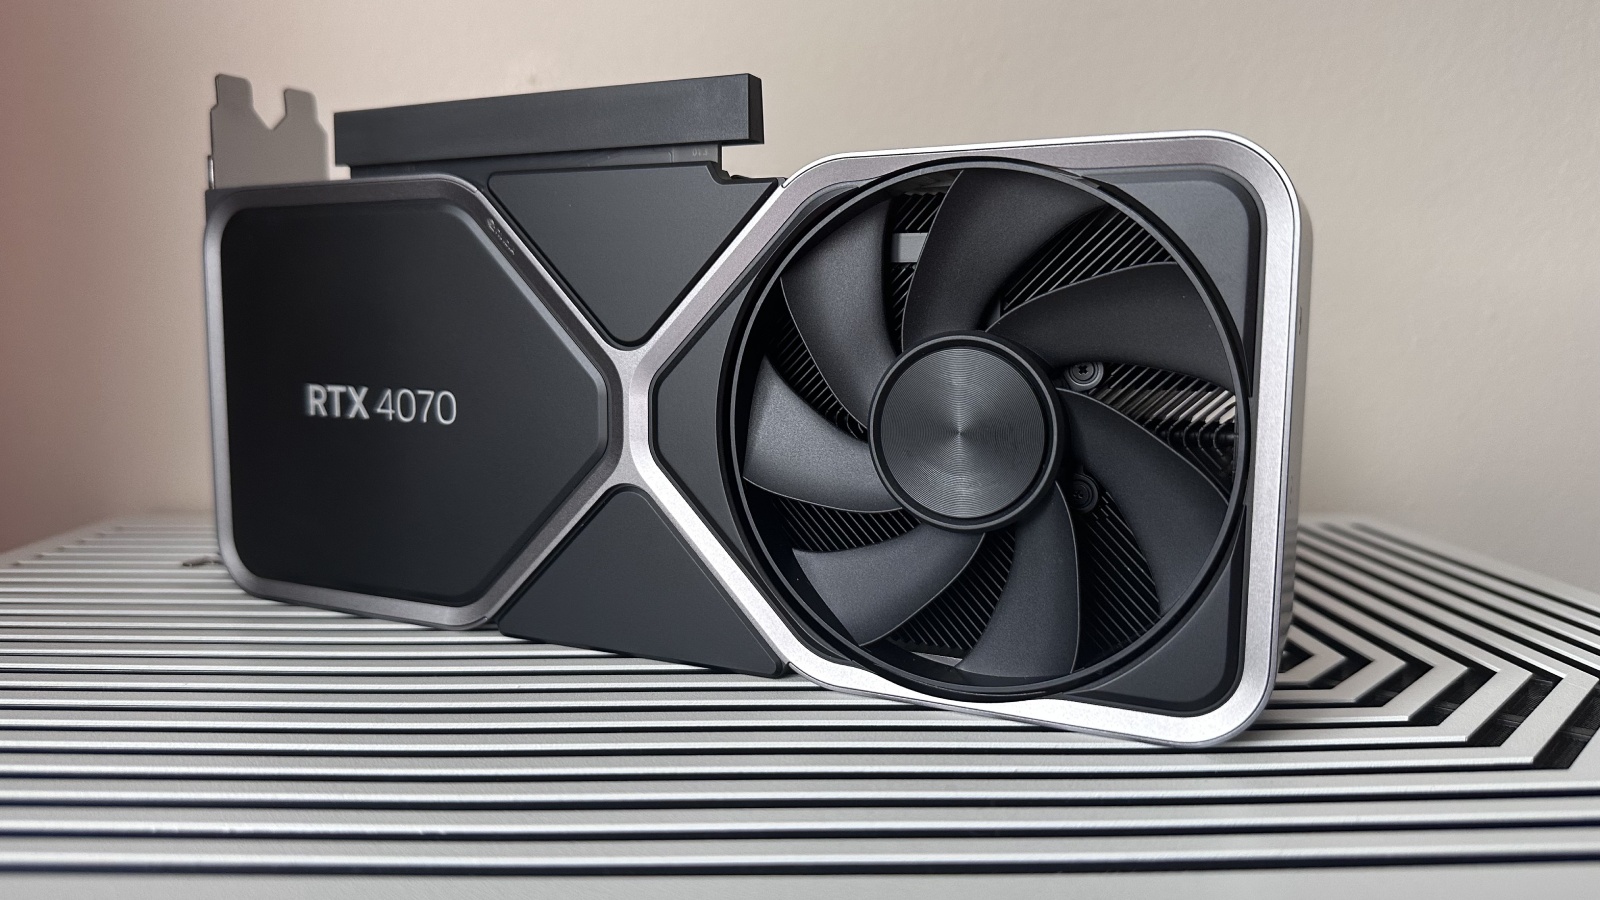 NVIDIA GeForce RTX 4070 Ti Super GPU Review & Benchmarks: Power Efficiency  & Gaming 